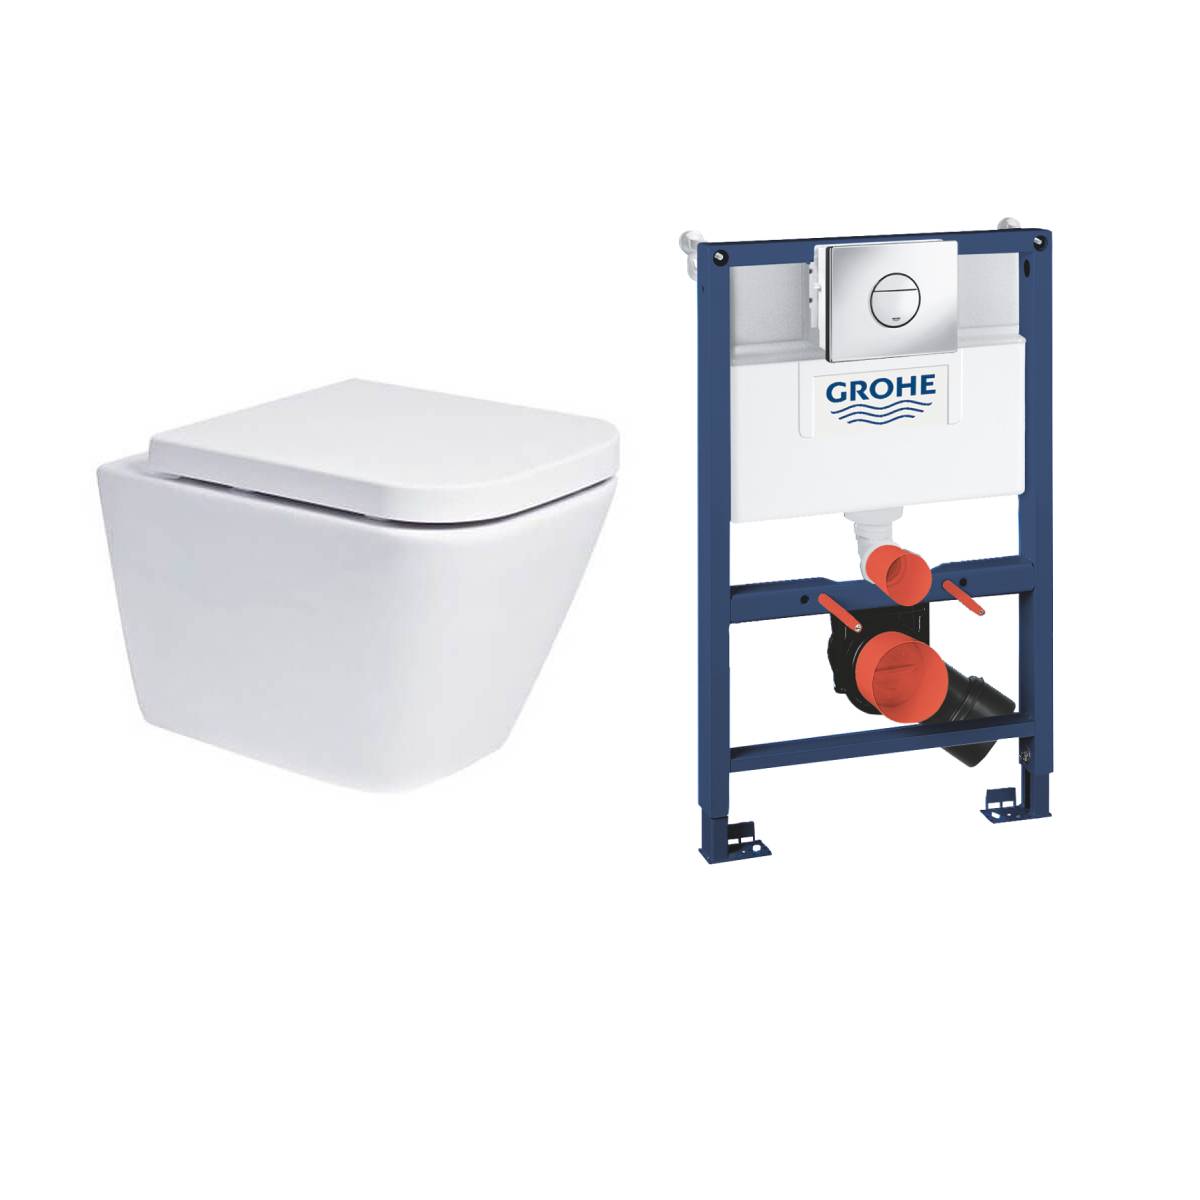 Wall Toilet & Grohe 3 in 0.82m Frame Deal (19940) White Ceramic - Bathshack